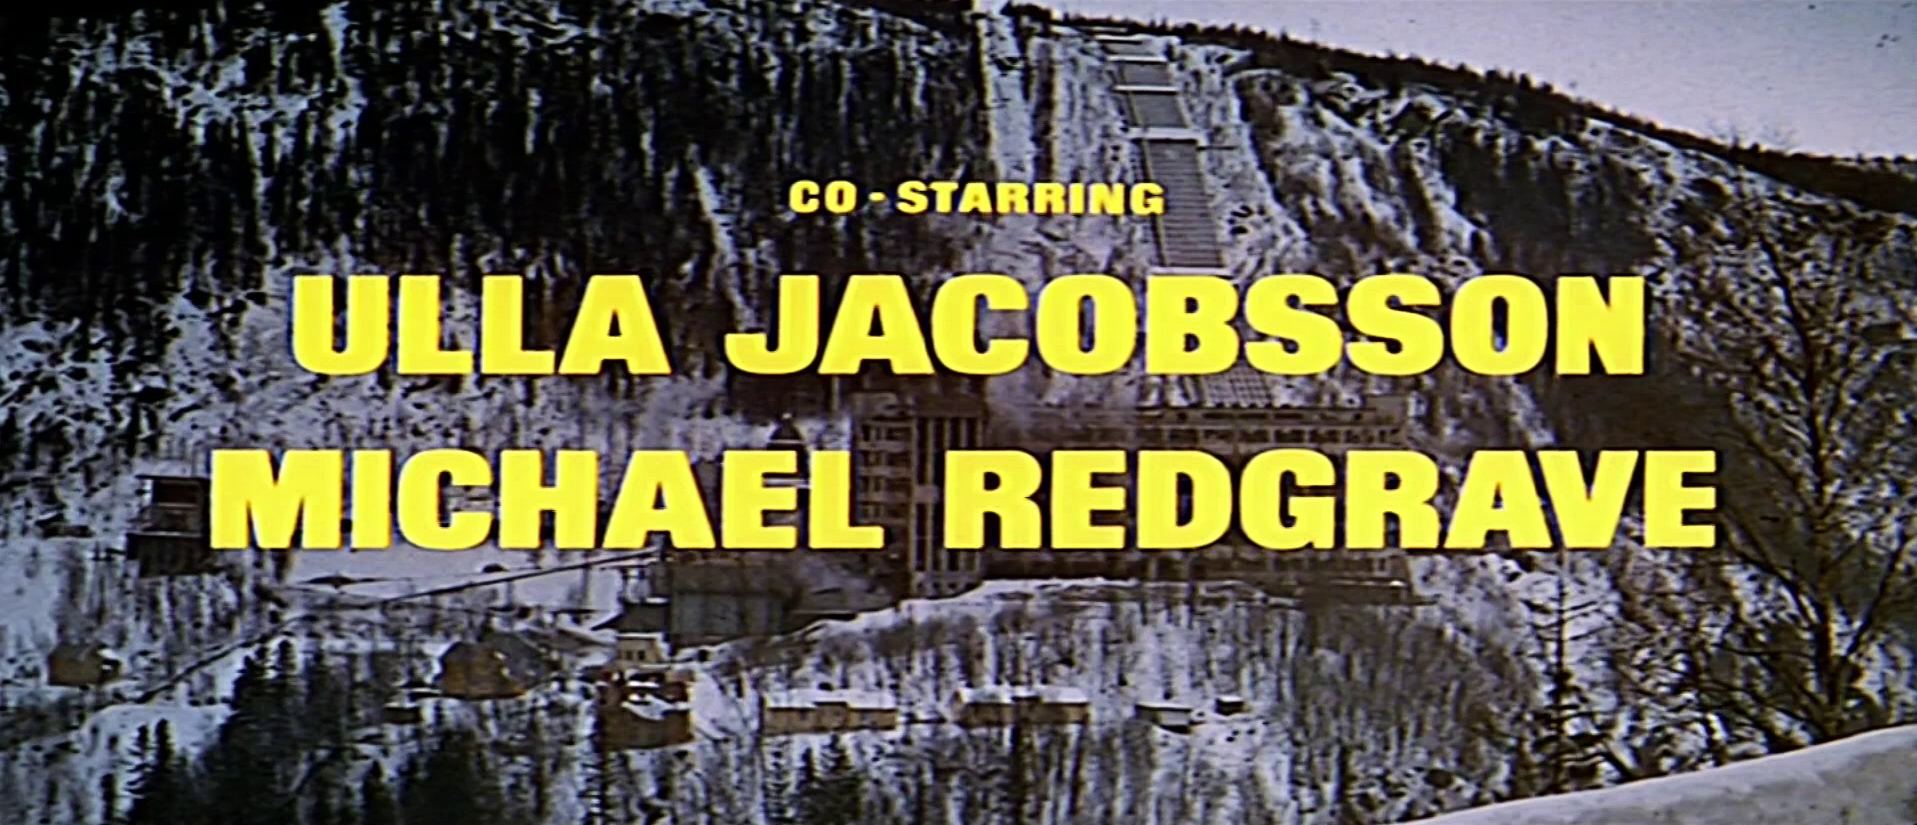 Main title from The Heroes of Telemark (1965) (4). Co-starring Ulla Jacobsson, Michael Redgrave